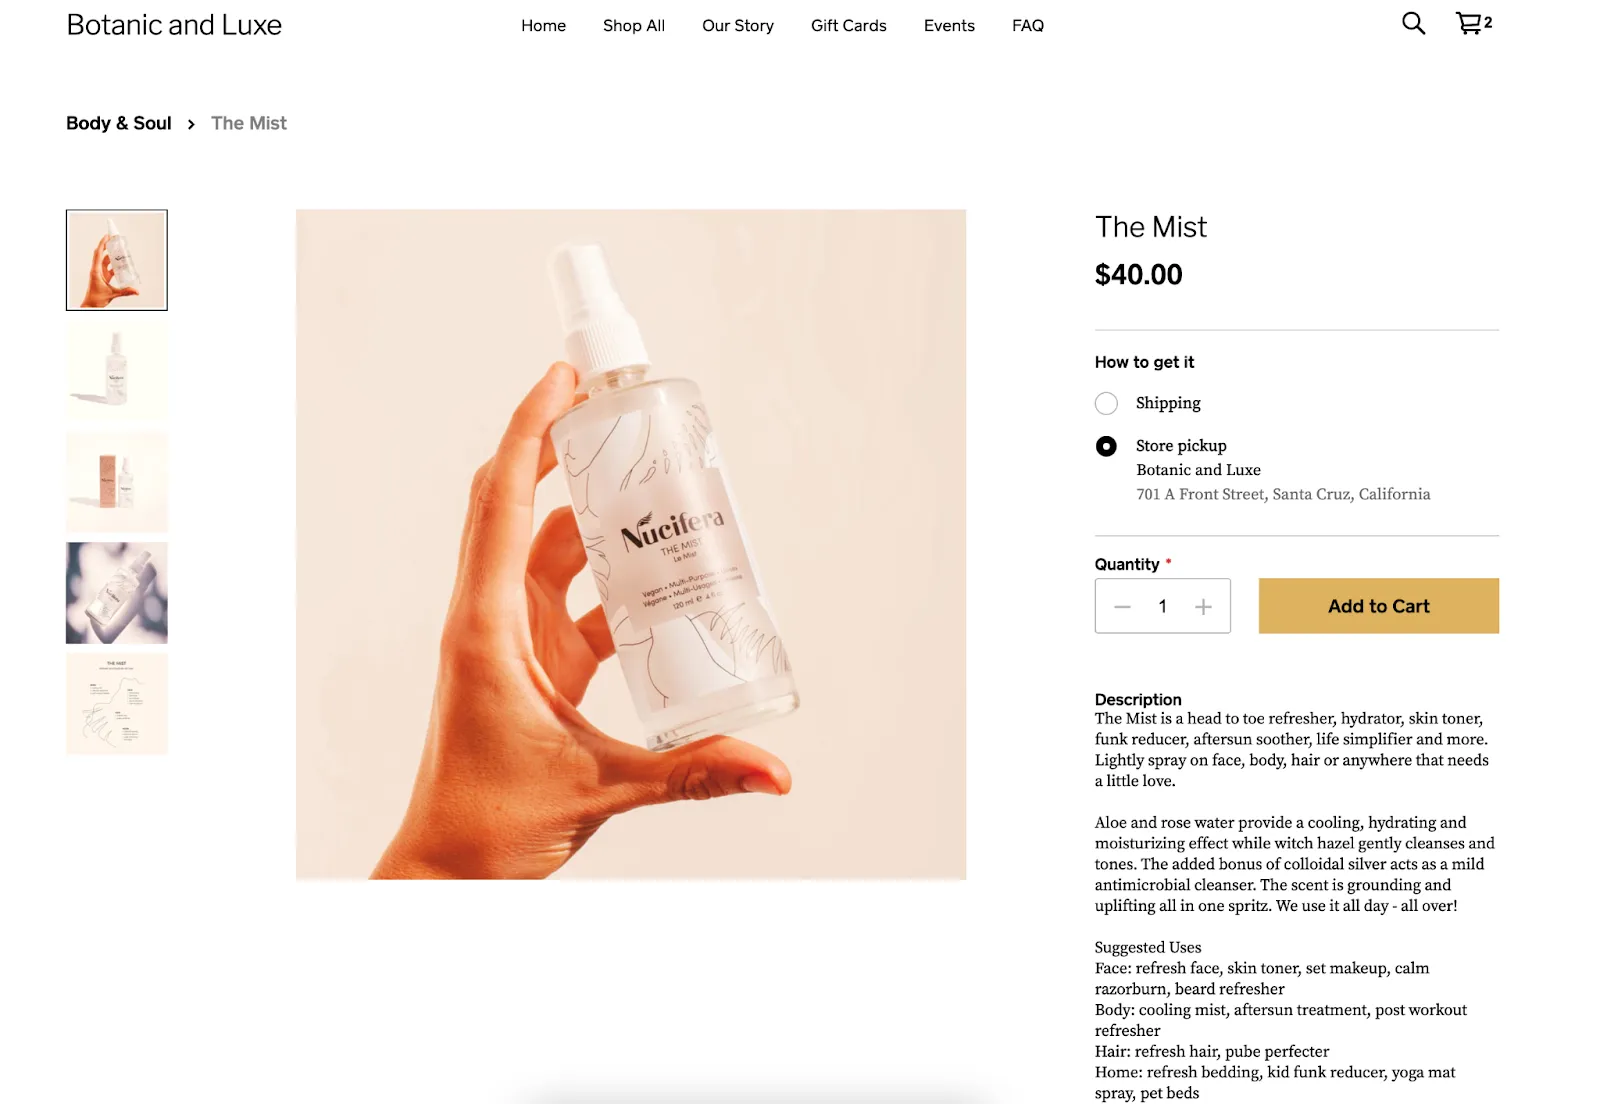 Botanic and Luxe product page - wellness website features